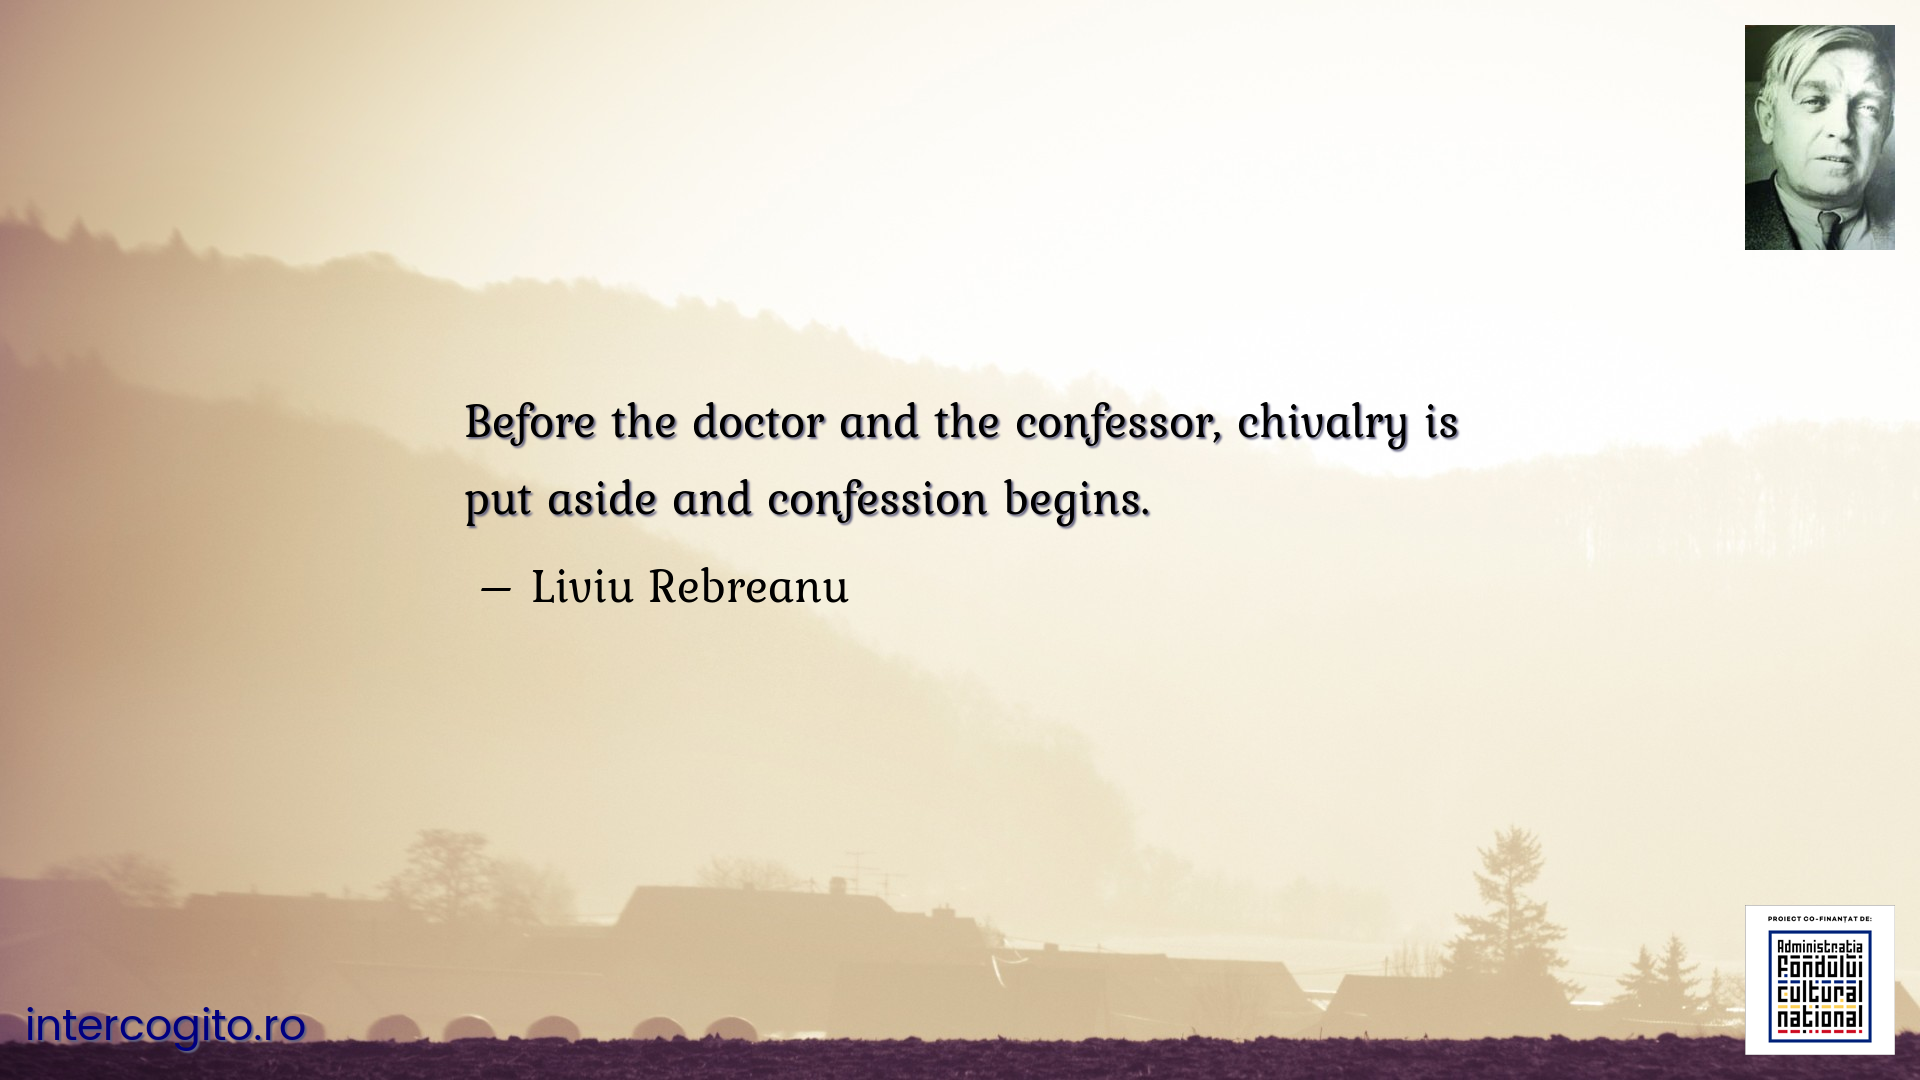 Before the doctor and the confessor, chivalry is put aside and confession begins.